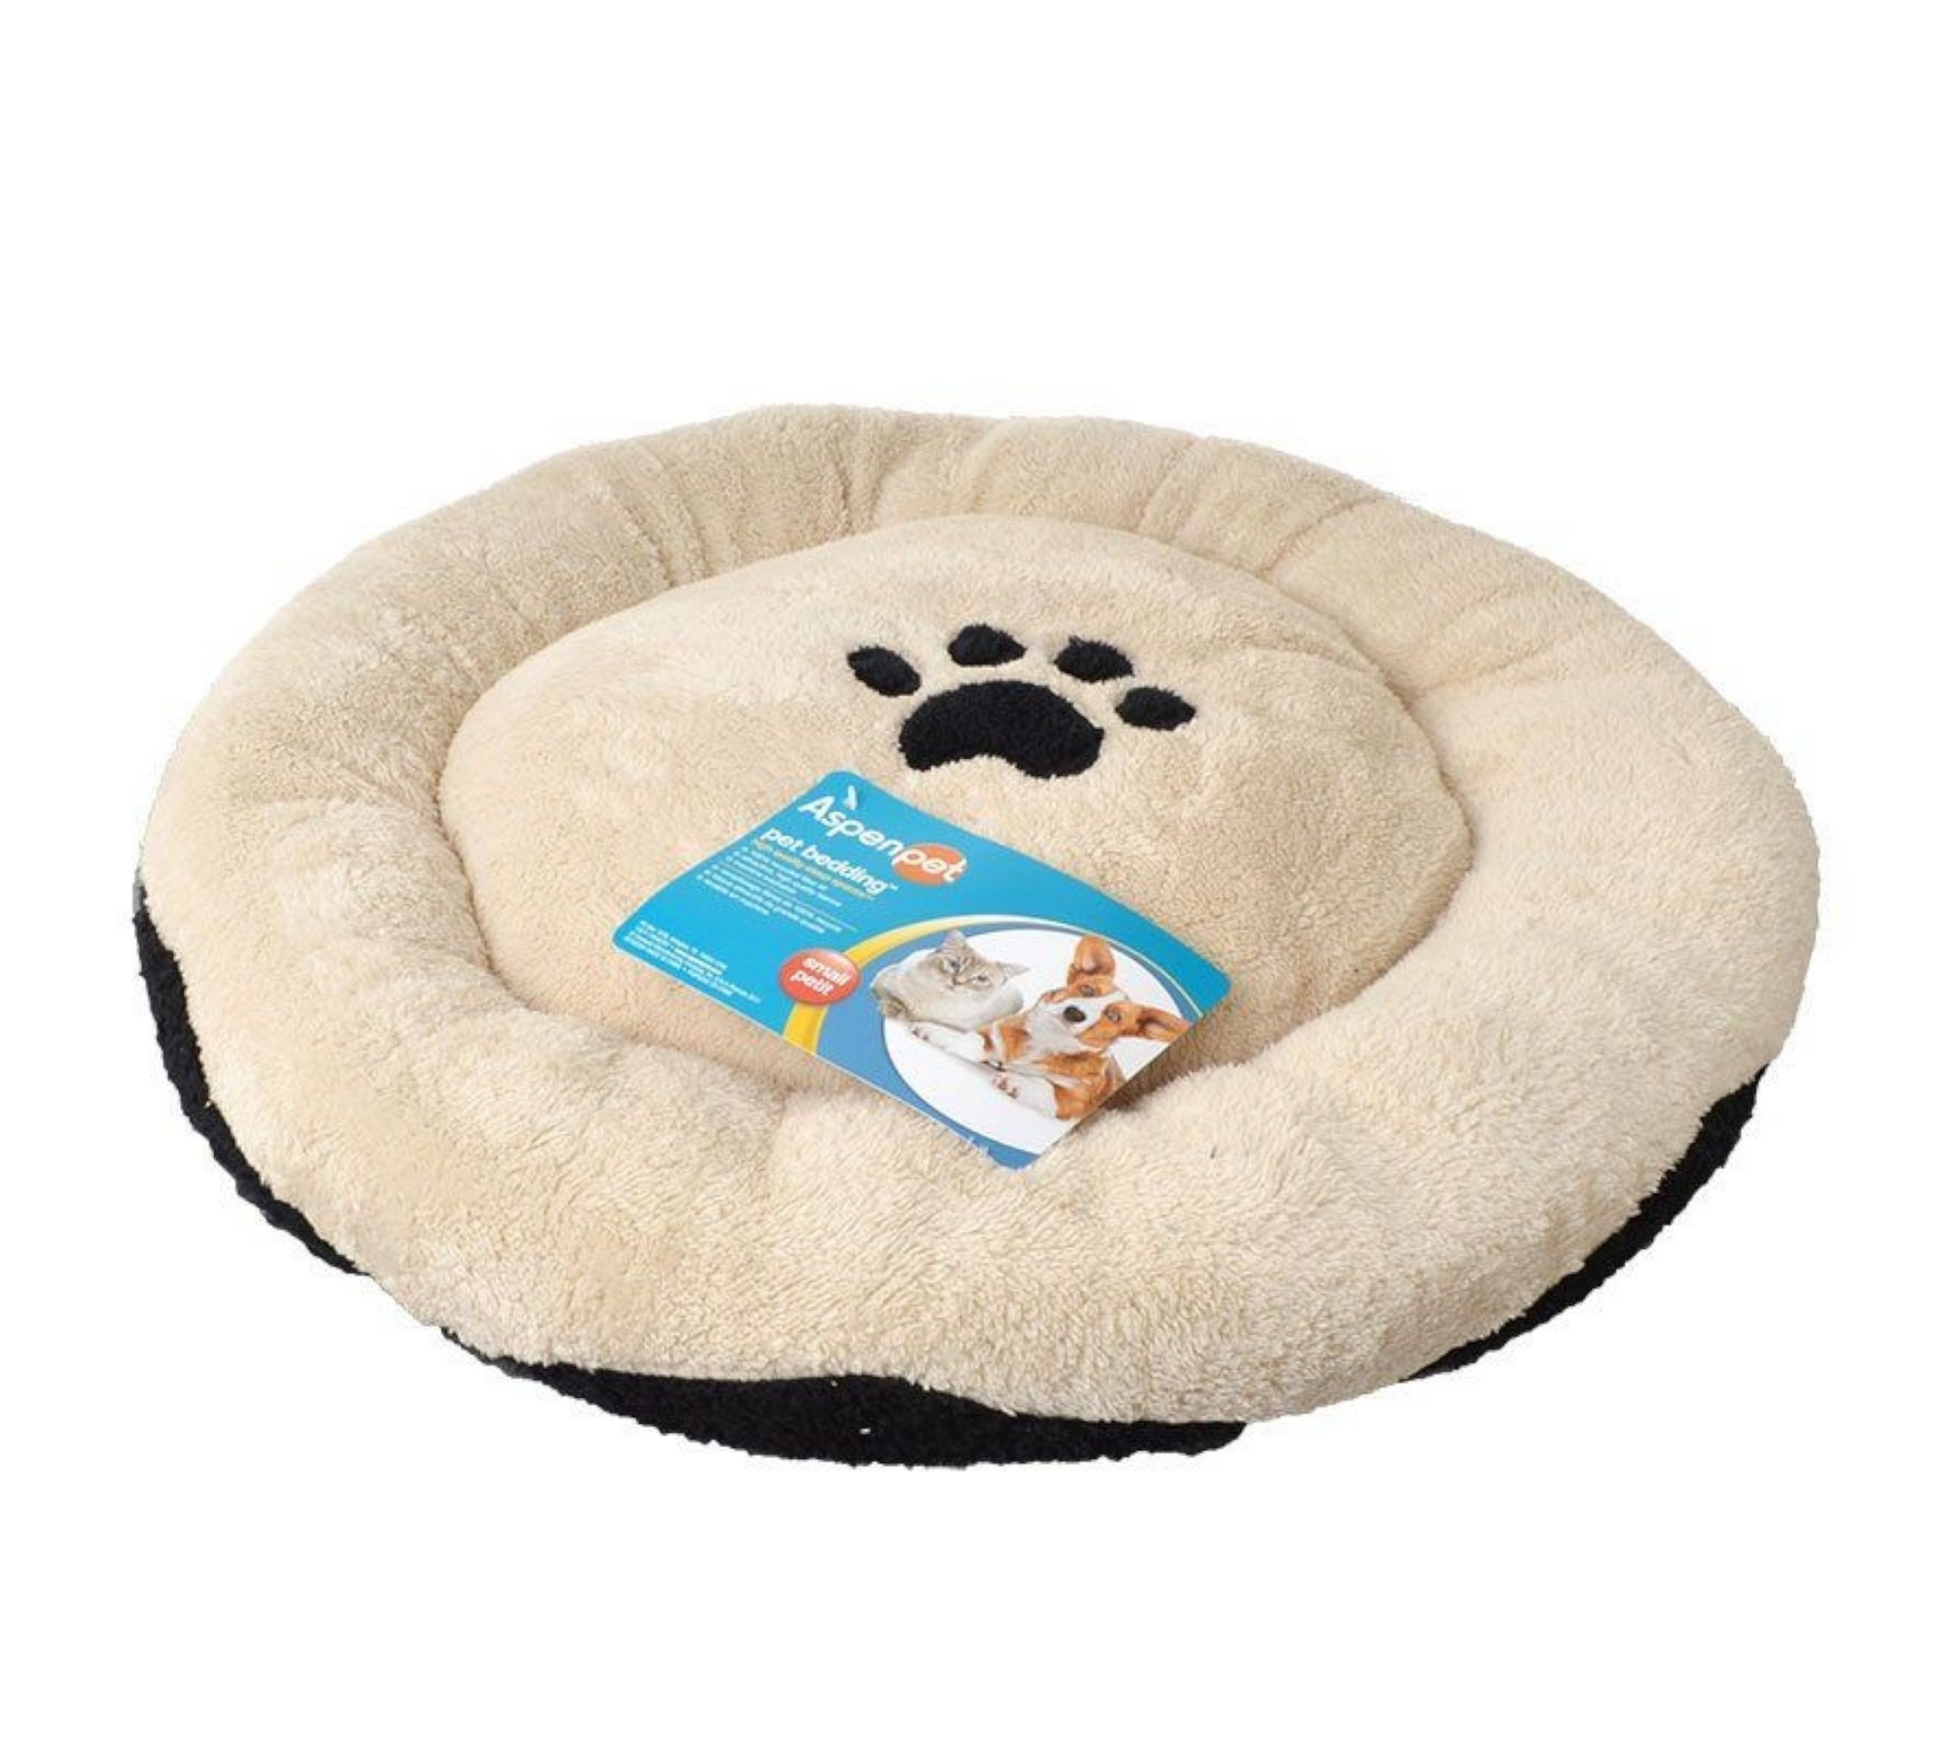 Canine's World Bolster Dog Beds Aspen Pet Round Pet Bed with Paw Applique Aspen Pet